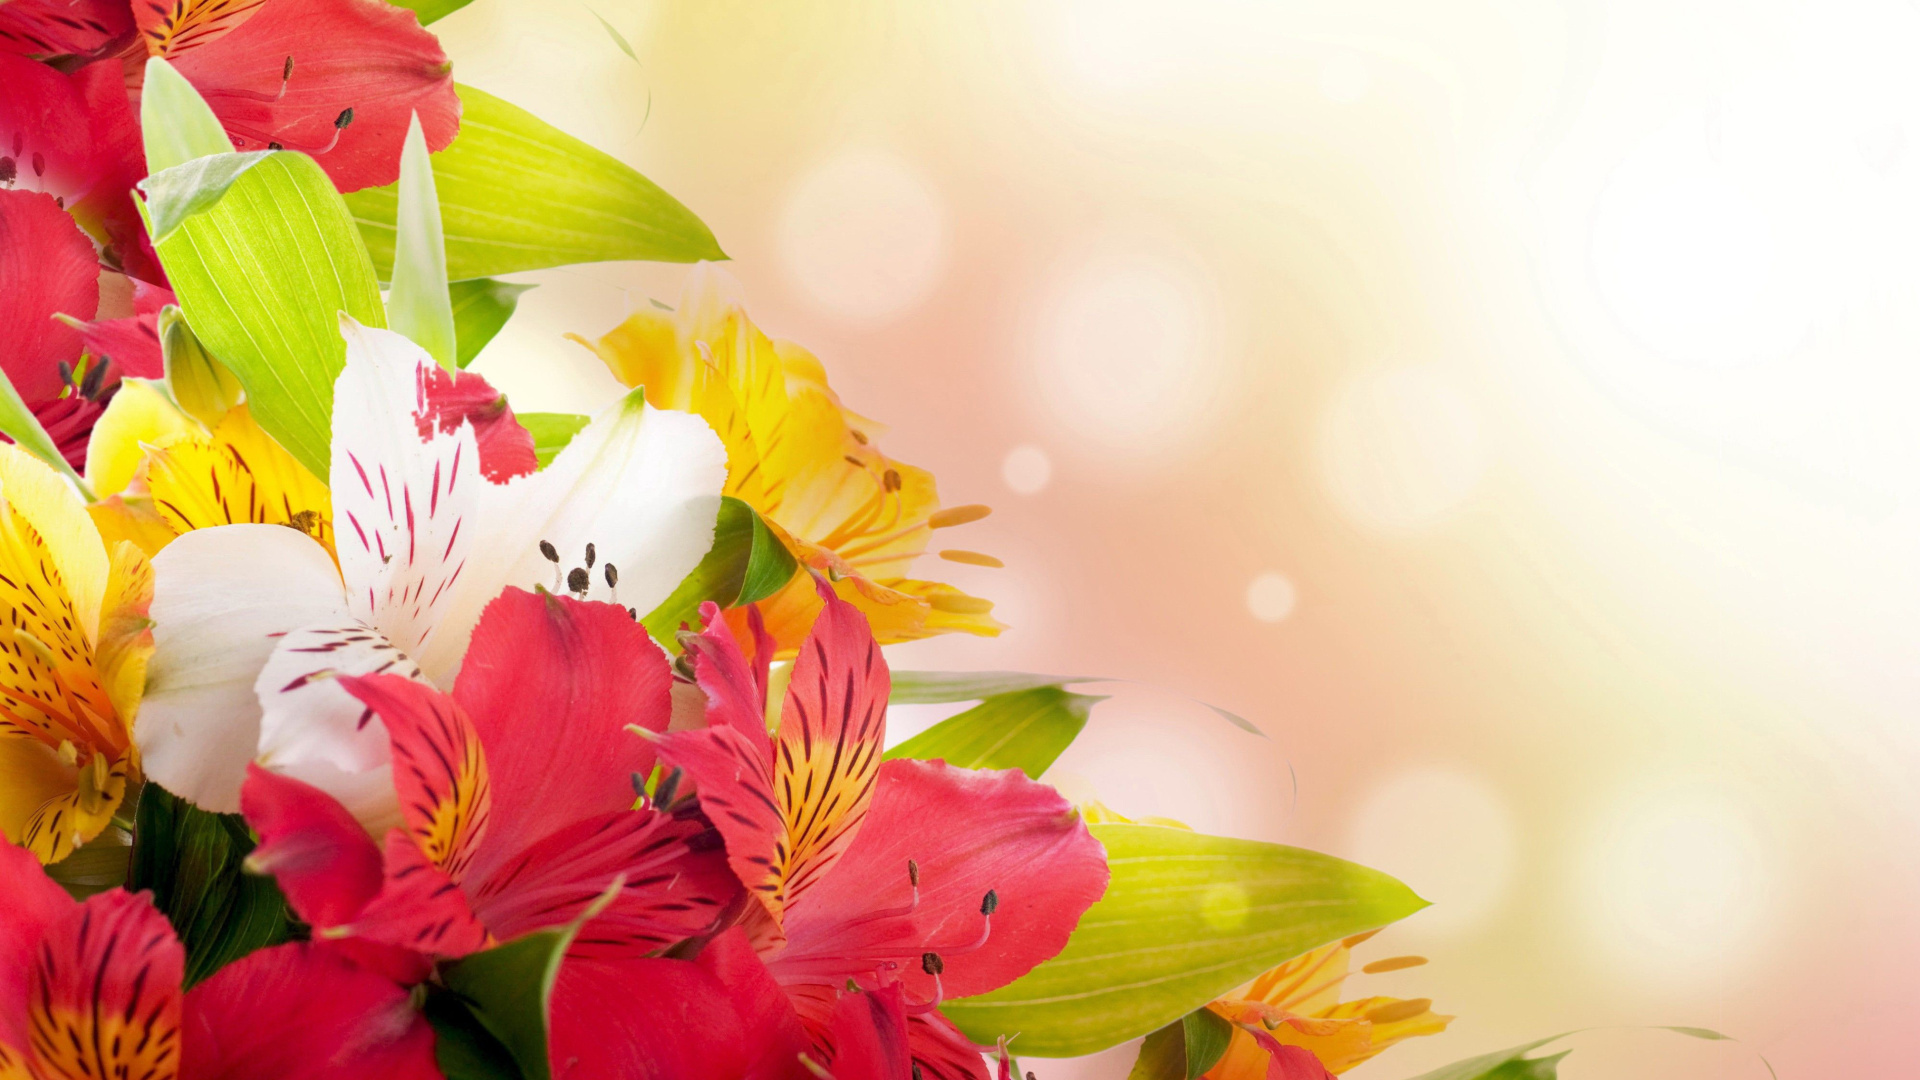 Das Flowers for the holiday of March 8 Wallpaper 1920x1080